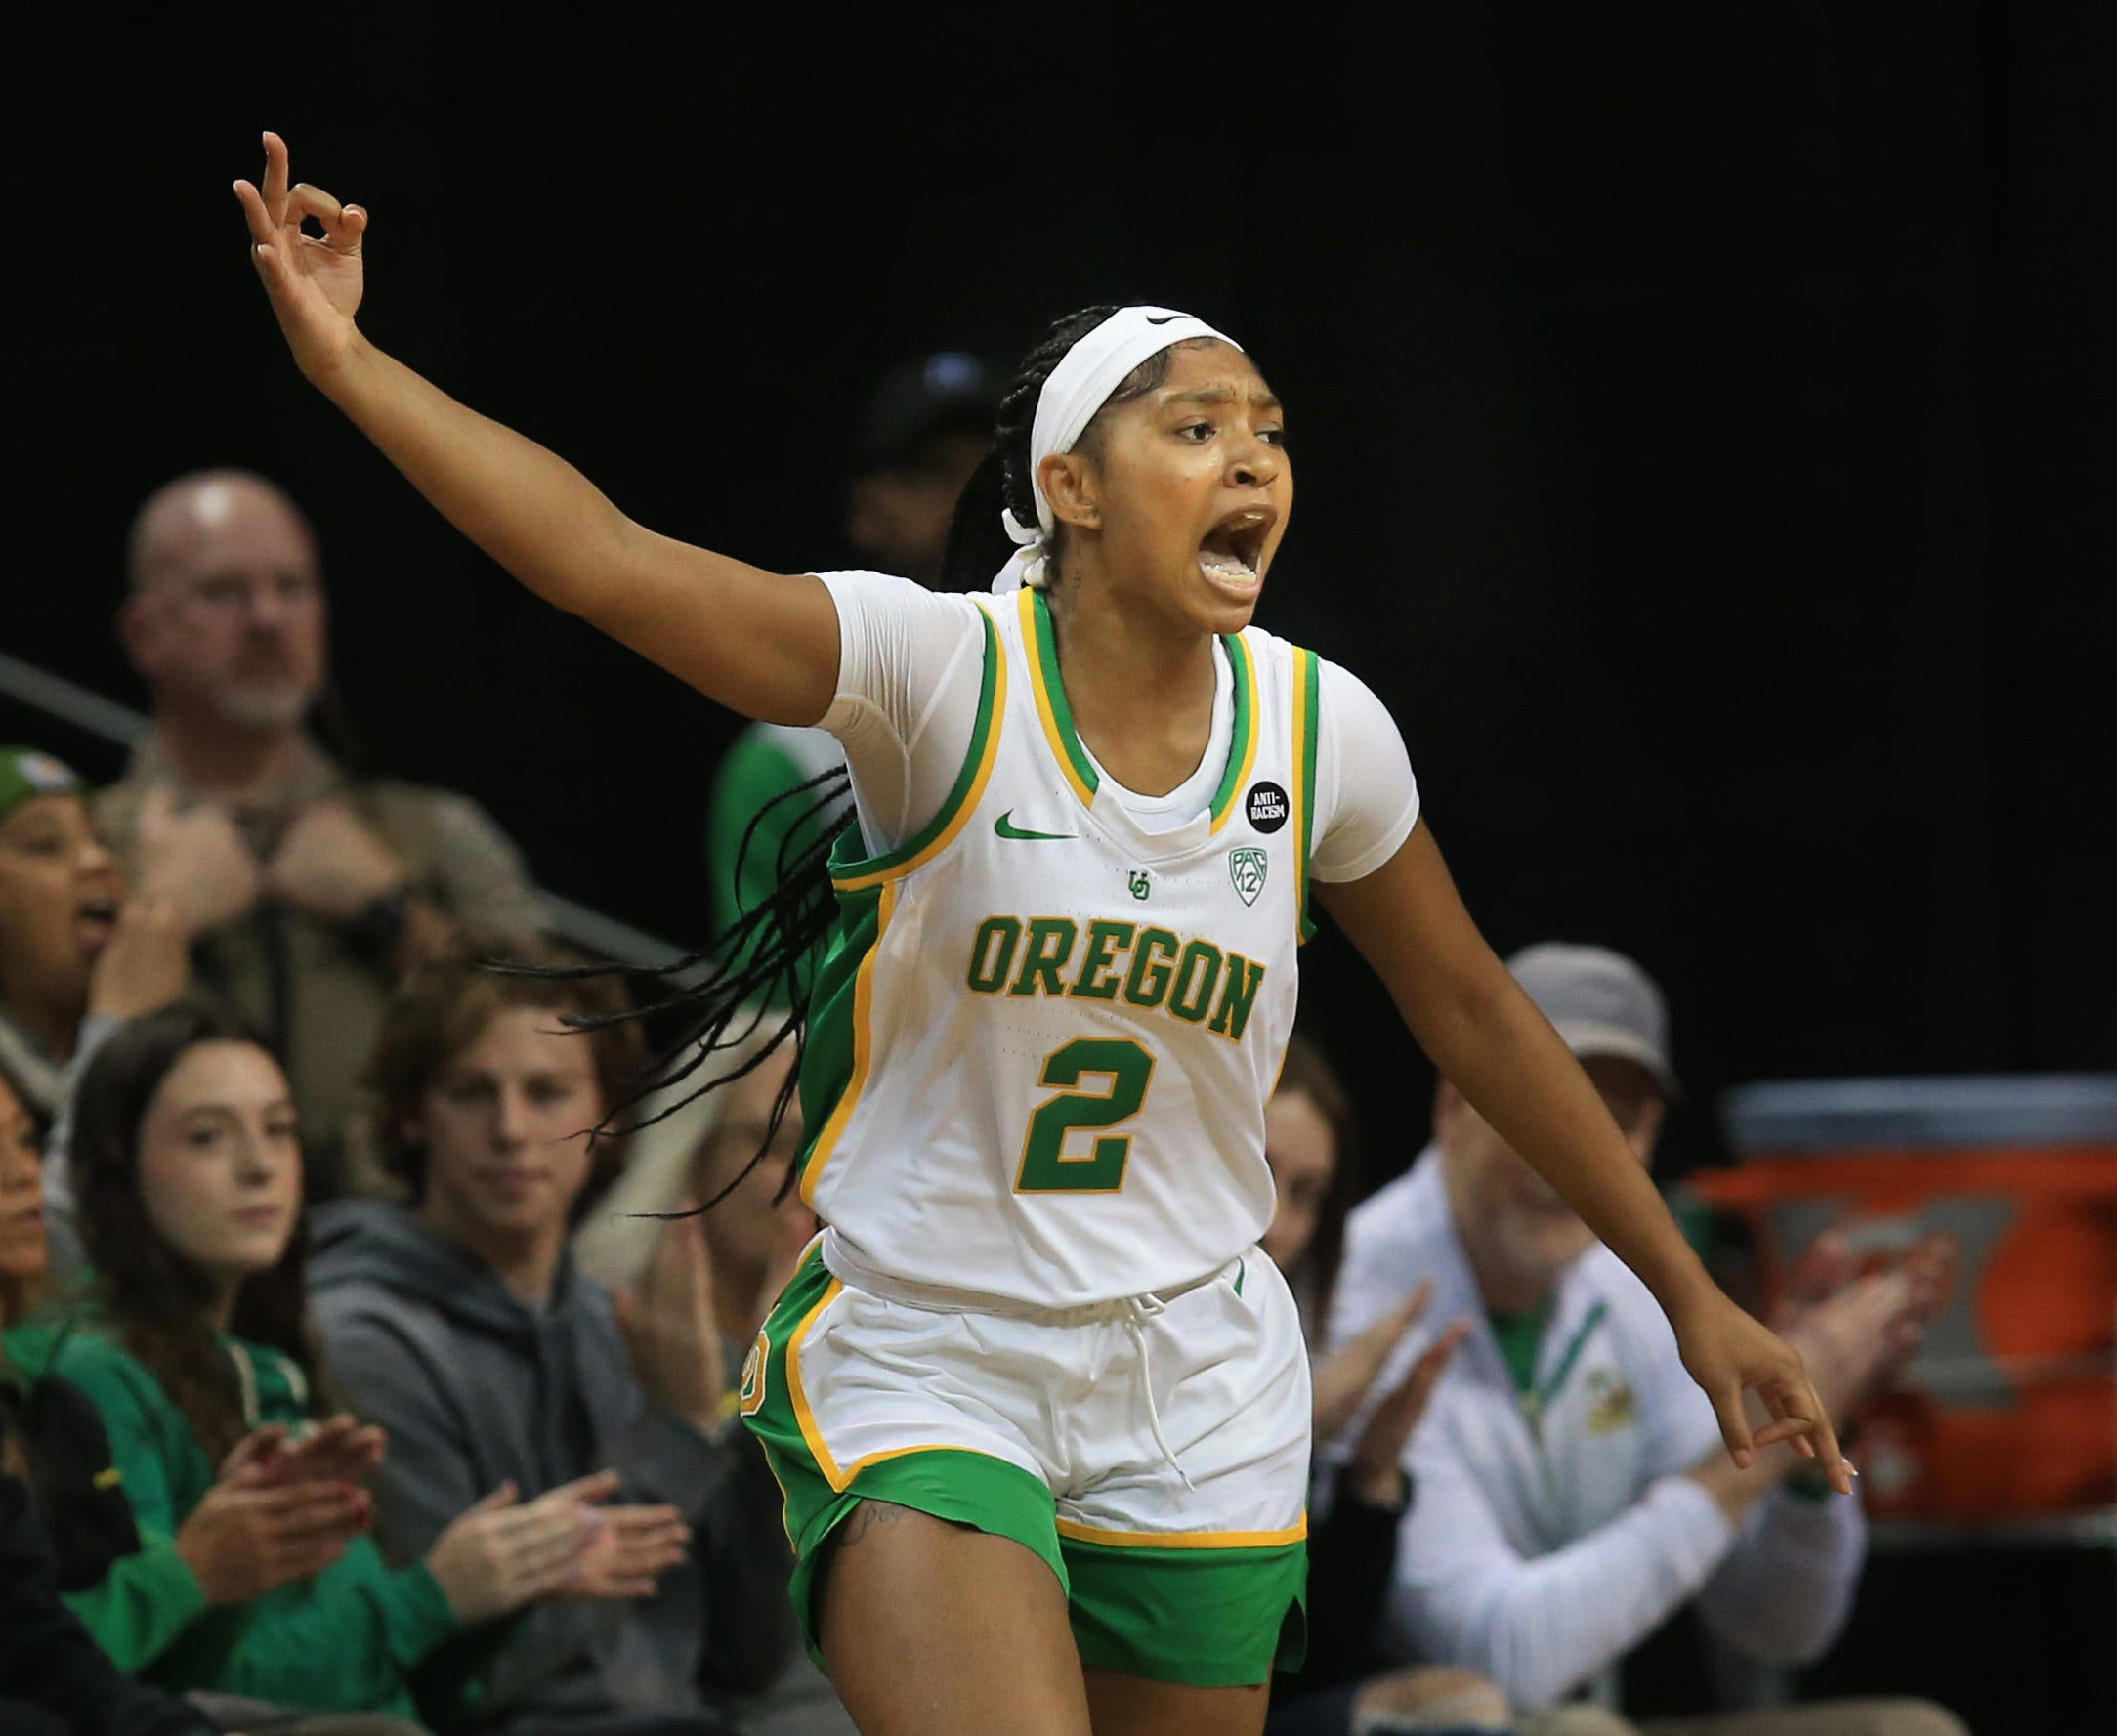 Oregon's Chance Gray named to Women's Americup Roster